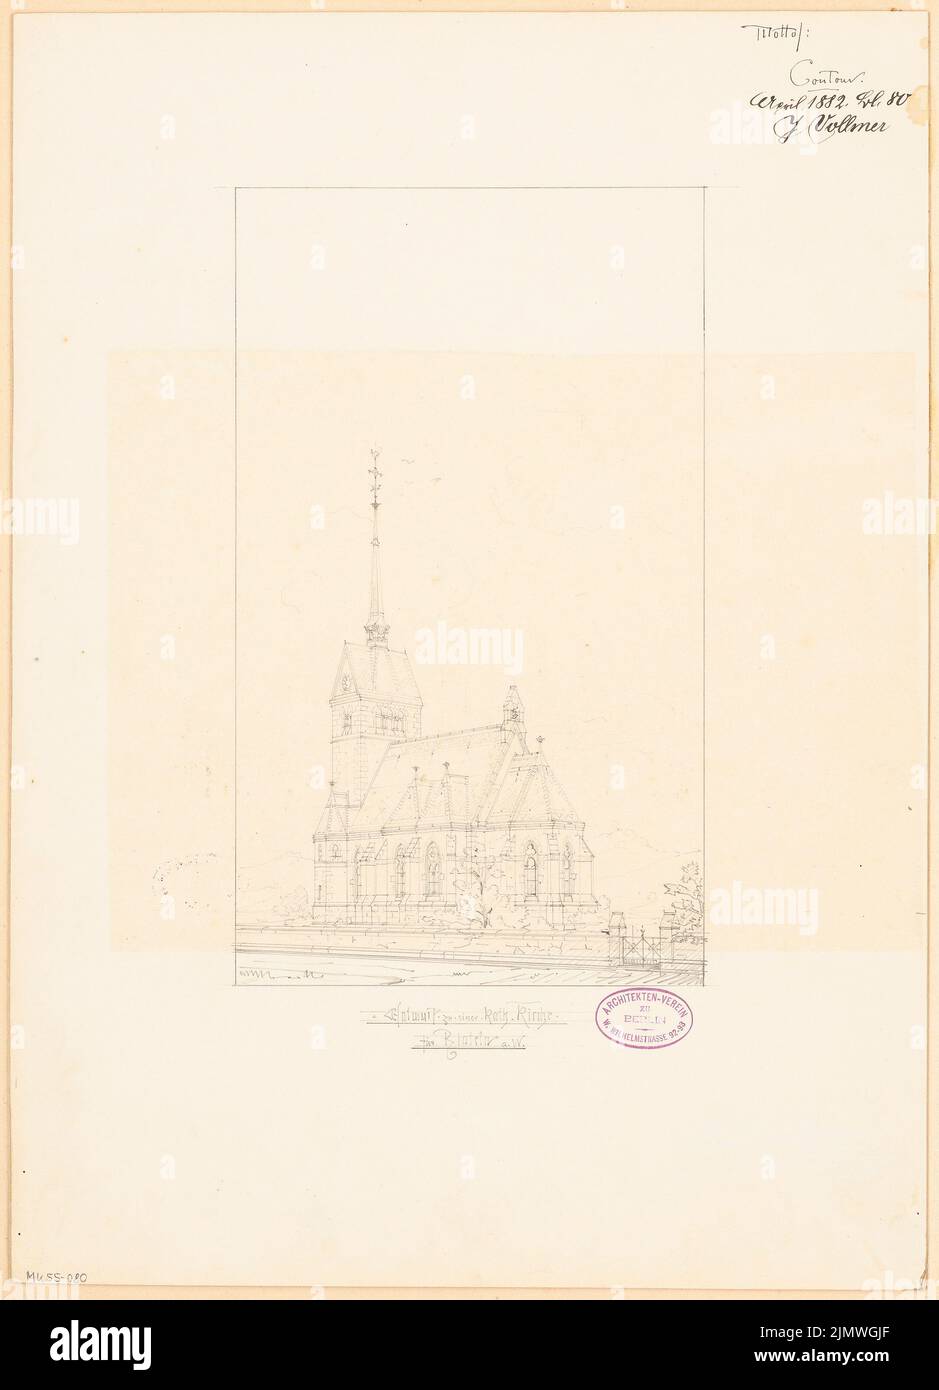 Vollmer Johannes (1845-1920), Catholic Church of St. Sturmius in Rinteln. Monthly competition April 1882 (04.1882): Perspective view. Pencil on paper, 51 x 36.8 cm (including scan edges) Vollmer Johannes  (1845-1920): Katholische Kirche St. Sturmius, Rinteln. Monatskonkurrenz April 1882 Stock Photo